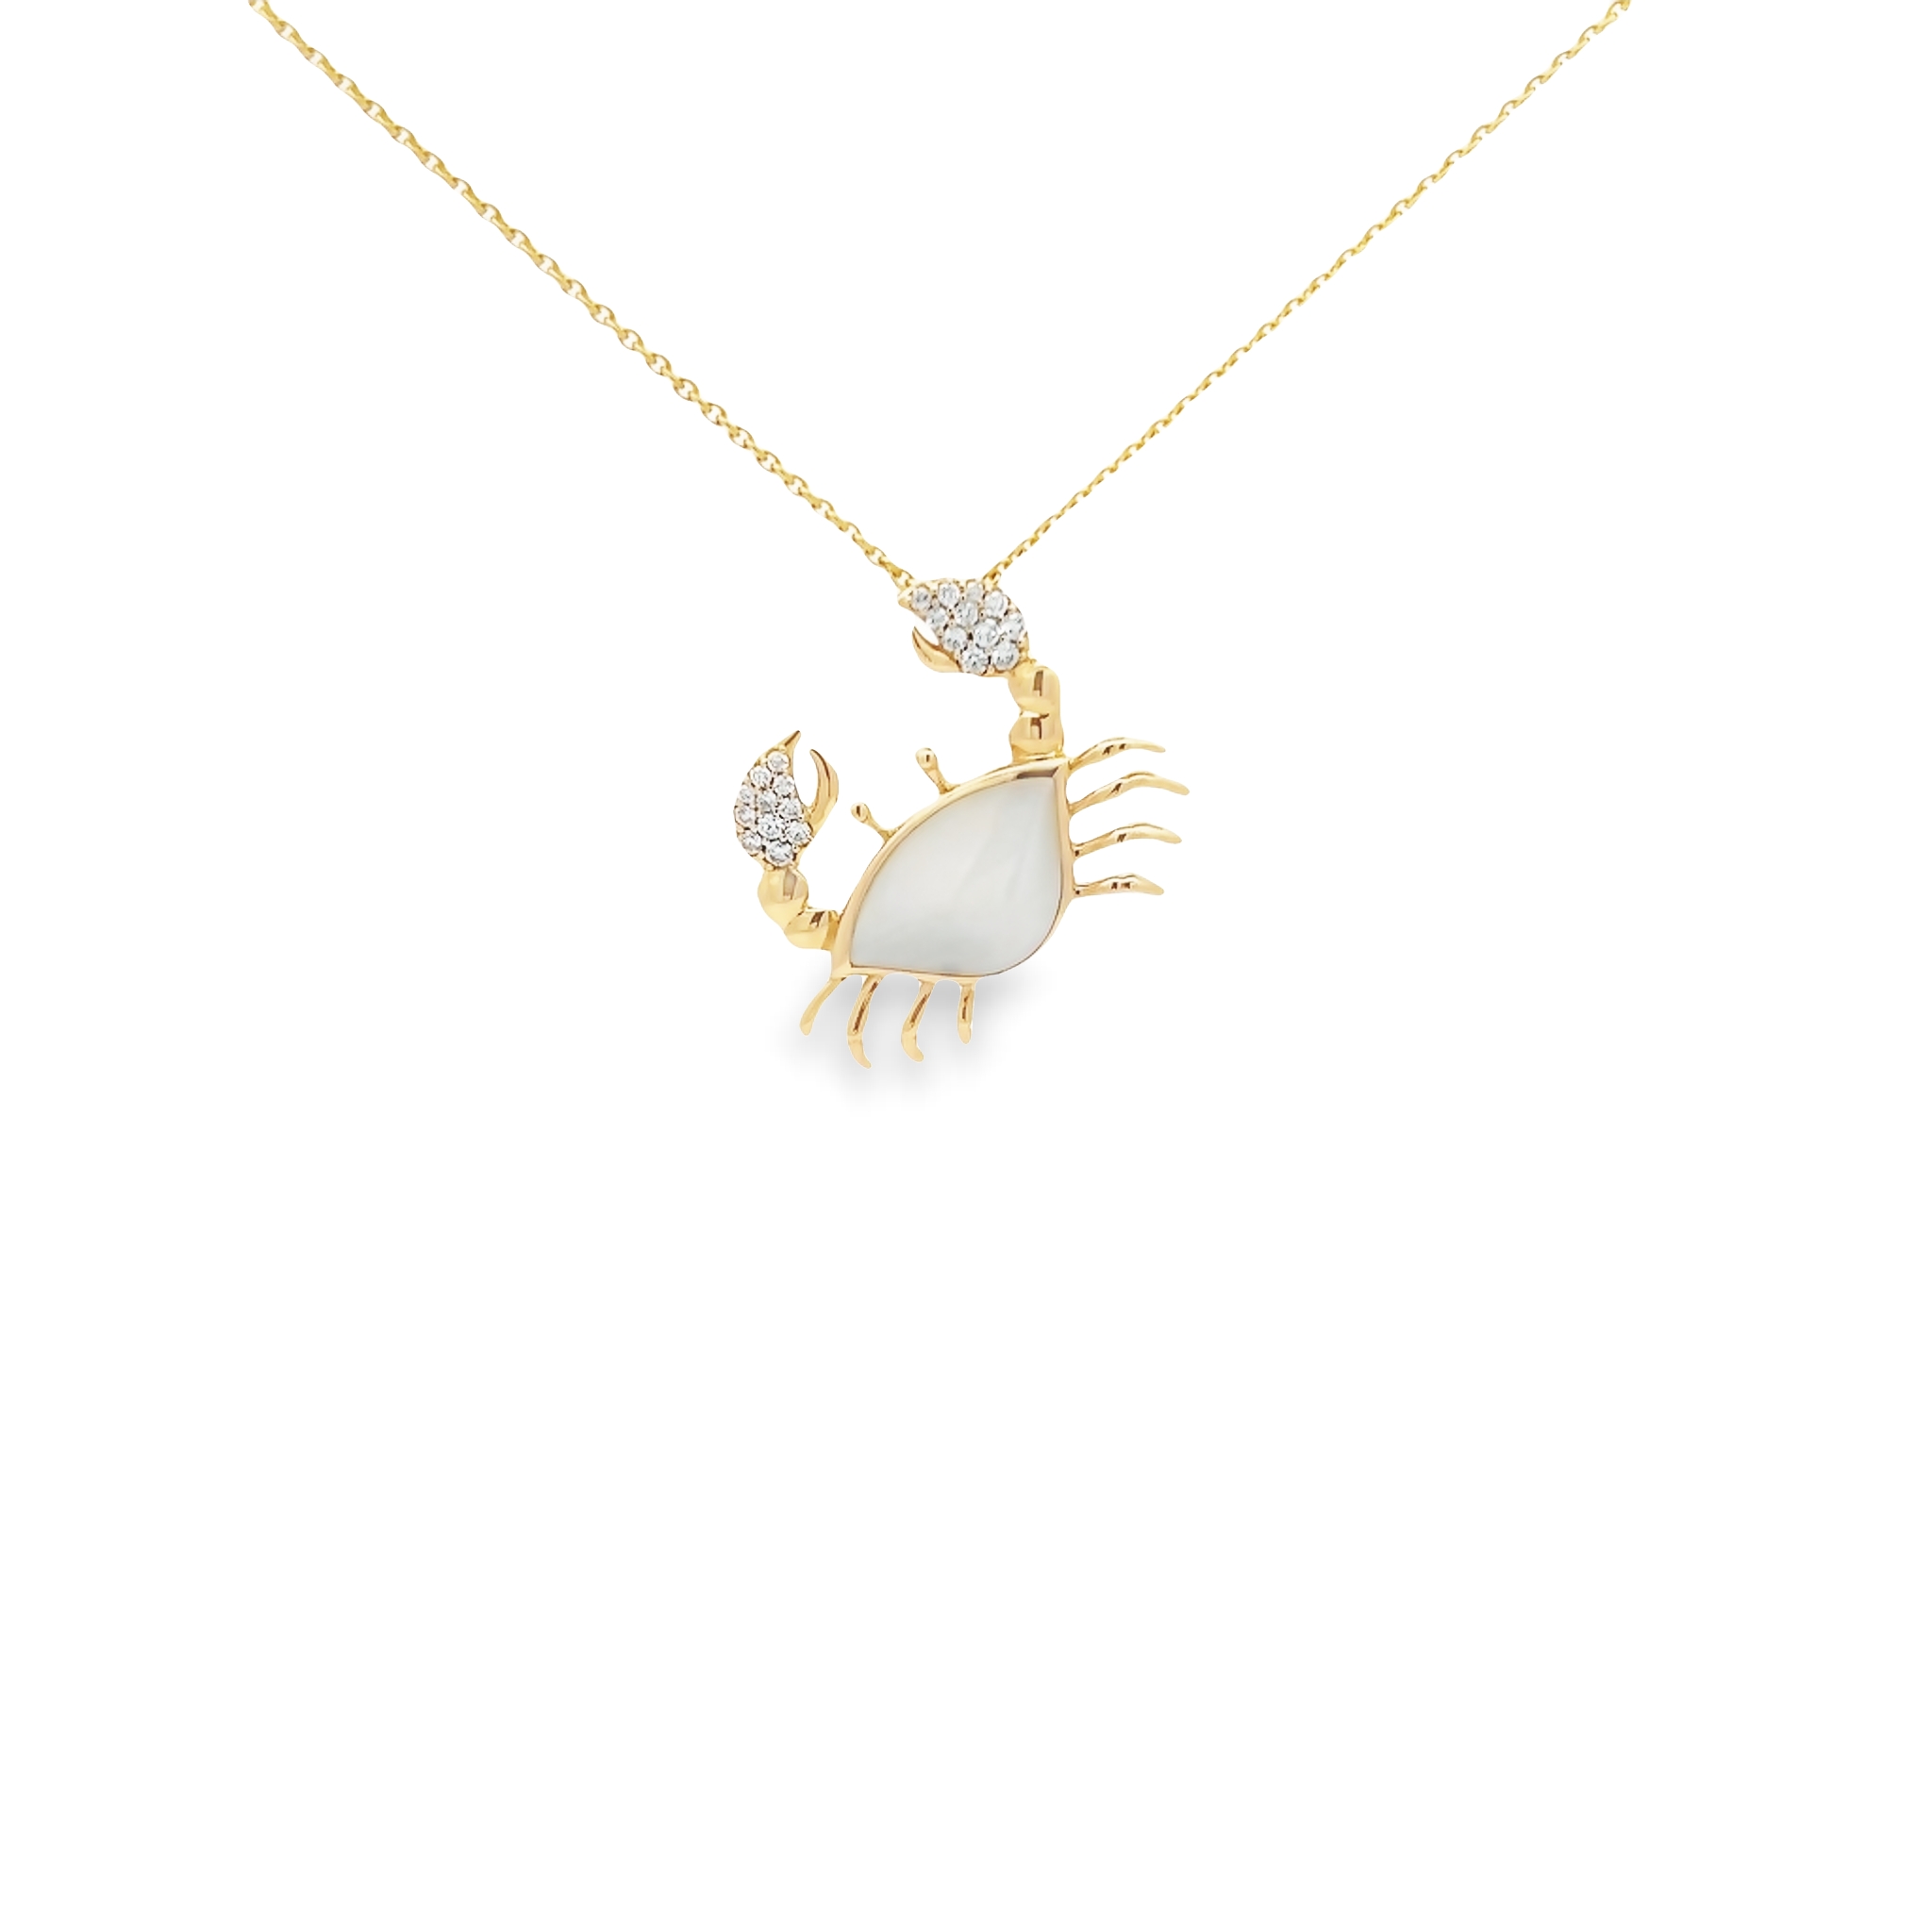 14 Karat Yellow Gold Crab Pendant With 22=0.21 Total Weight Round Brilliant G Vs Diamonds And White Mother Of Pearl Inlay.